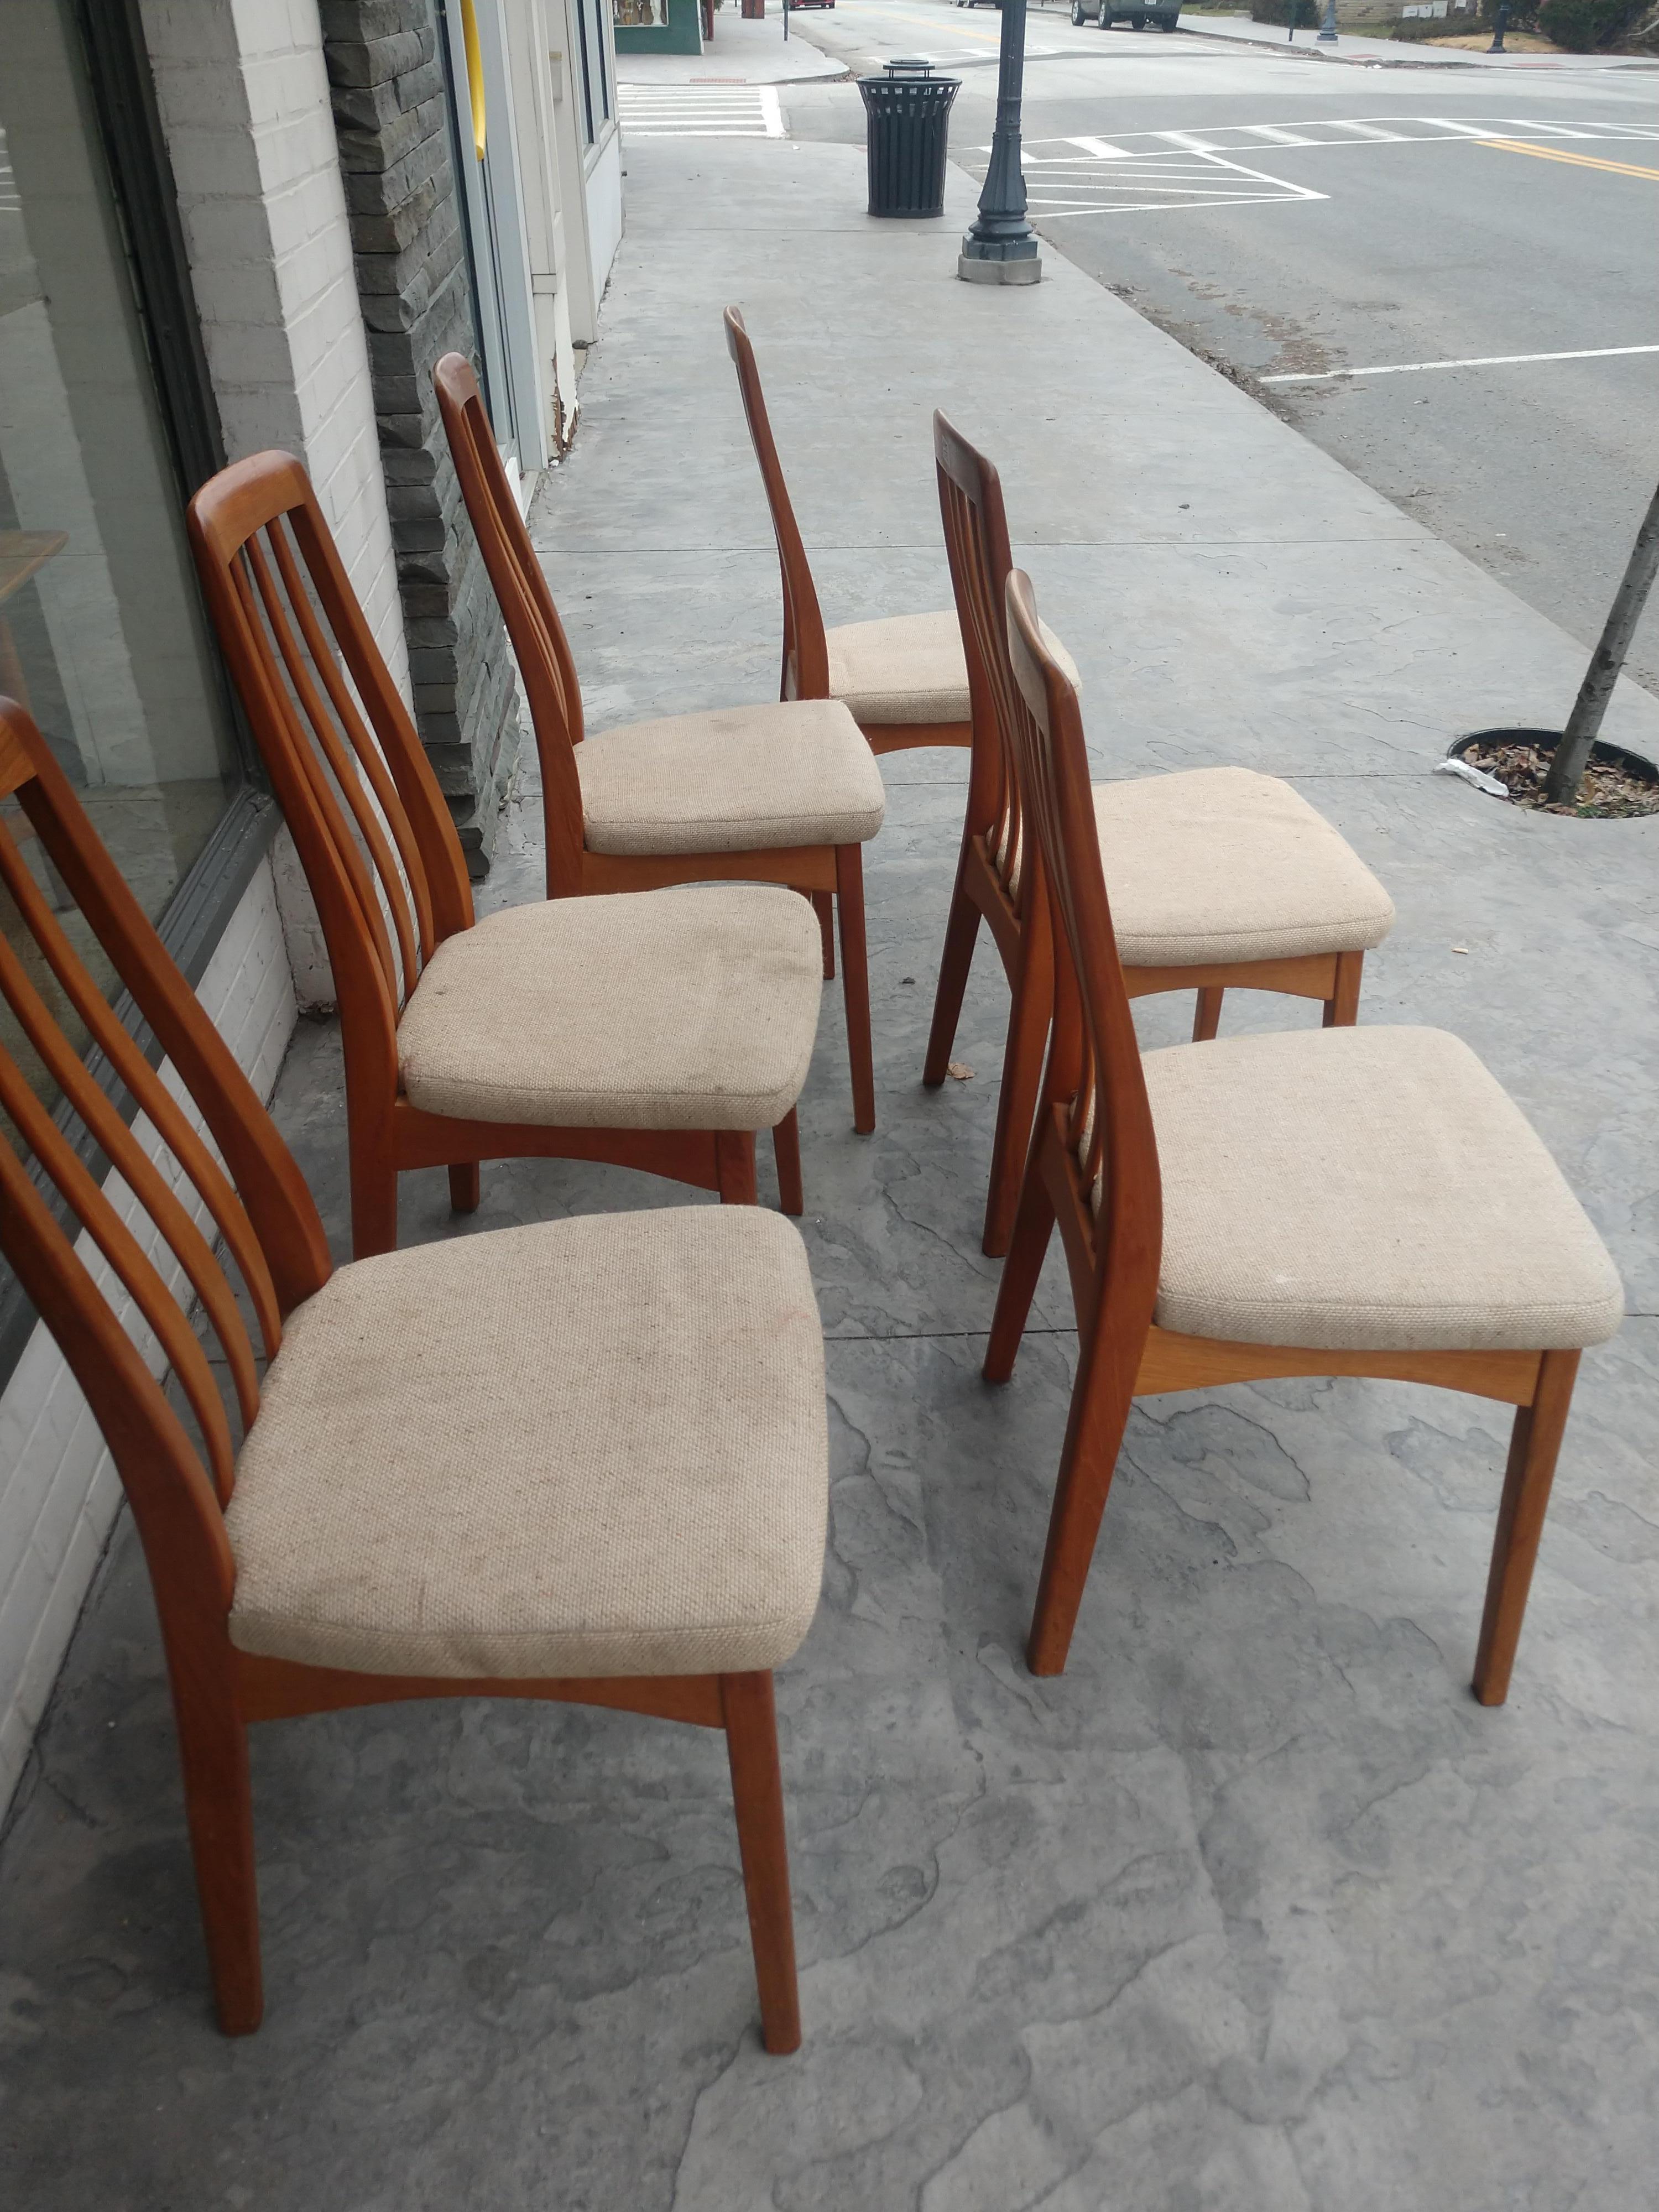 Simple and elegant set of 6 teak dining chairs by Benny Linden. Tall back chairs with curved slats in backs. Upholstered seats which need an upgrade. Teak frames are in excellent vintage condition with minimal wear. Sold as a set of six.